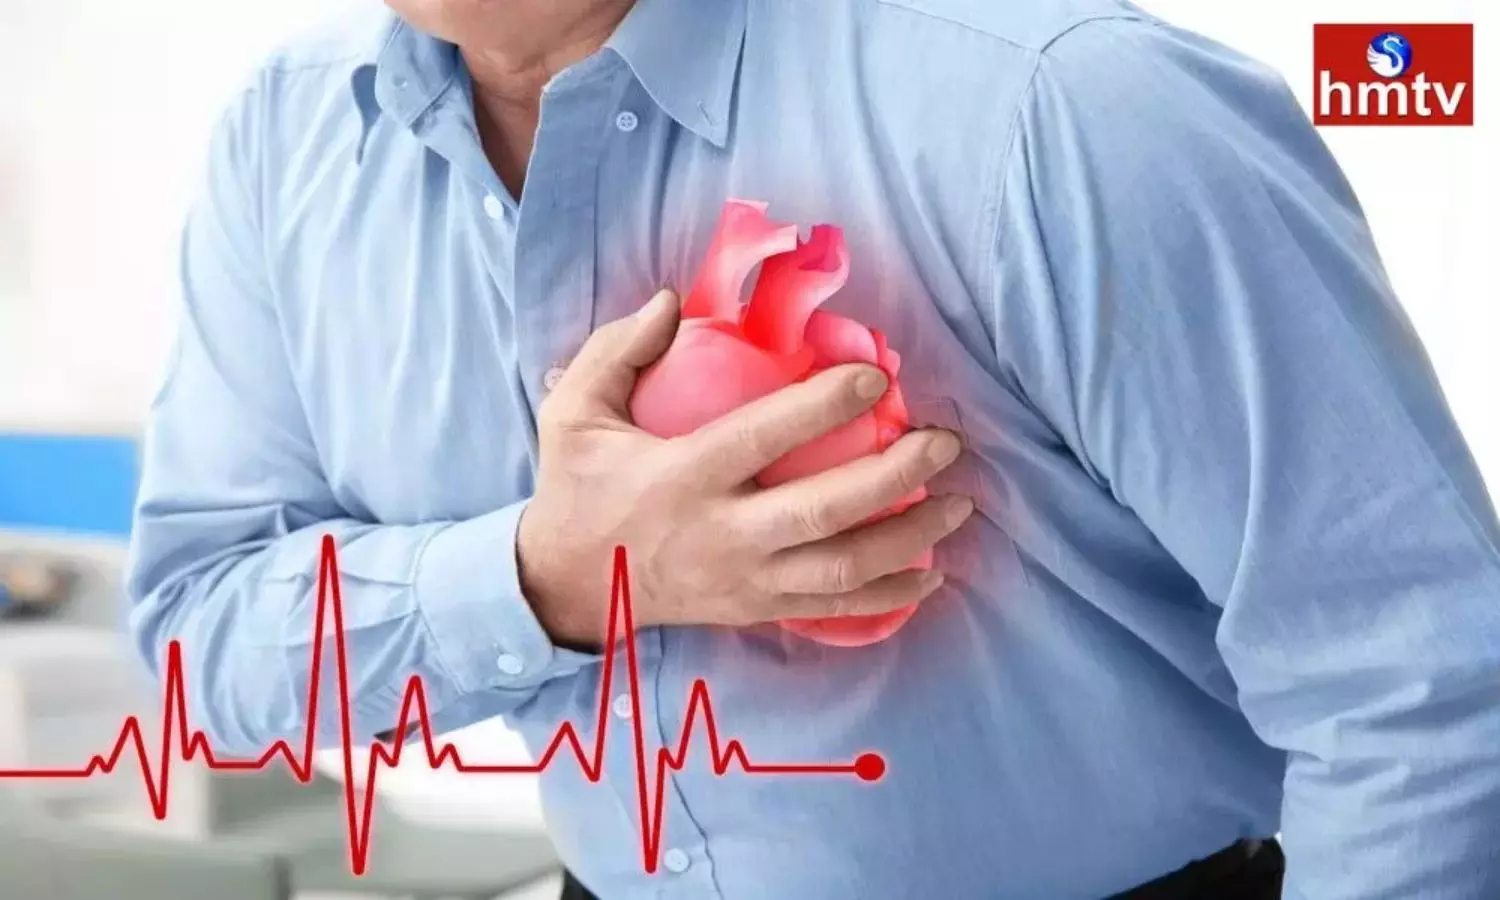 Such People Have a High Risk of Heart Attack Precautions Must be Followed